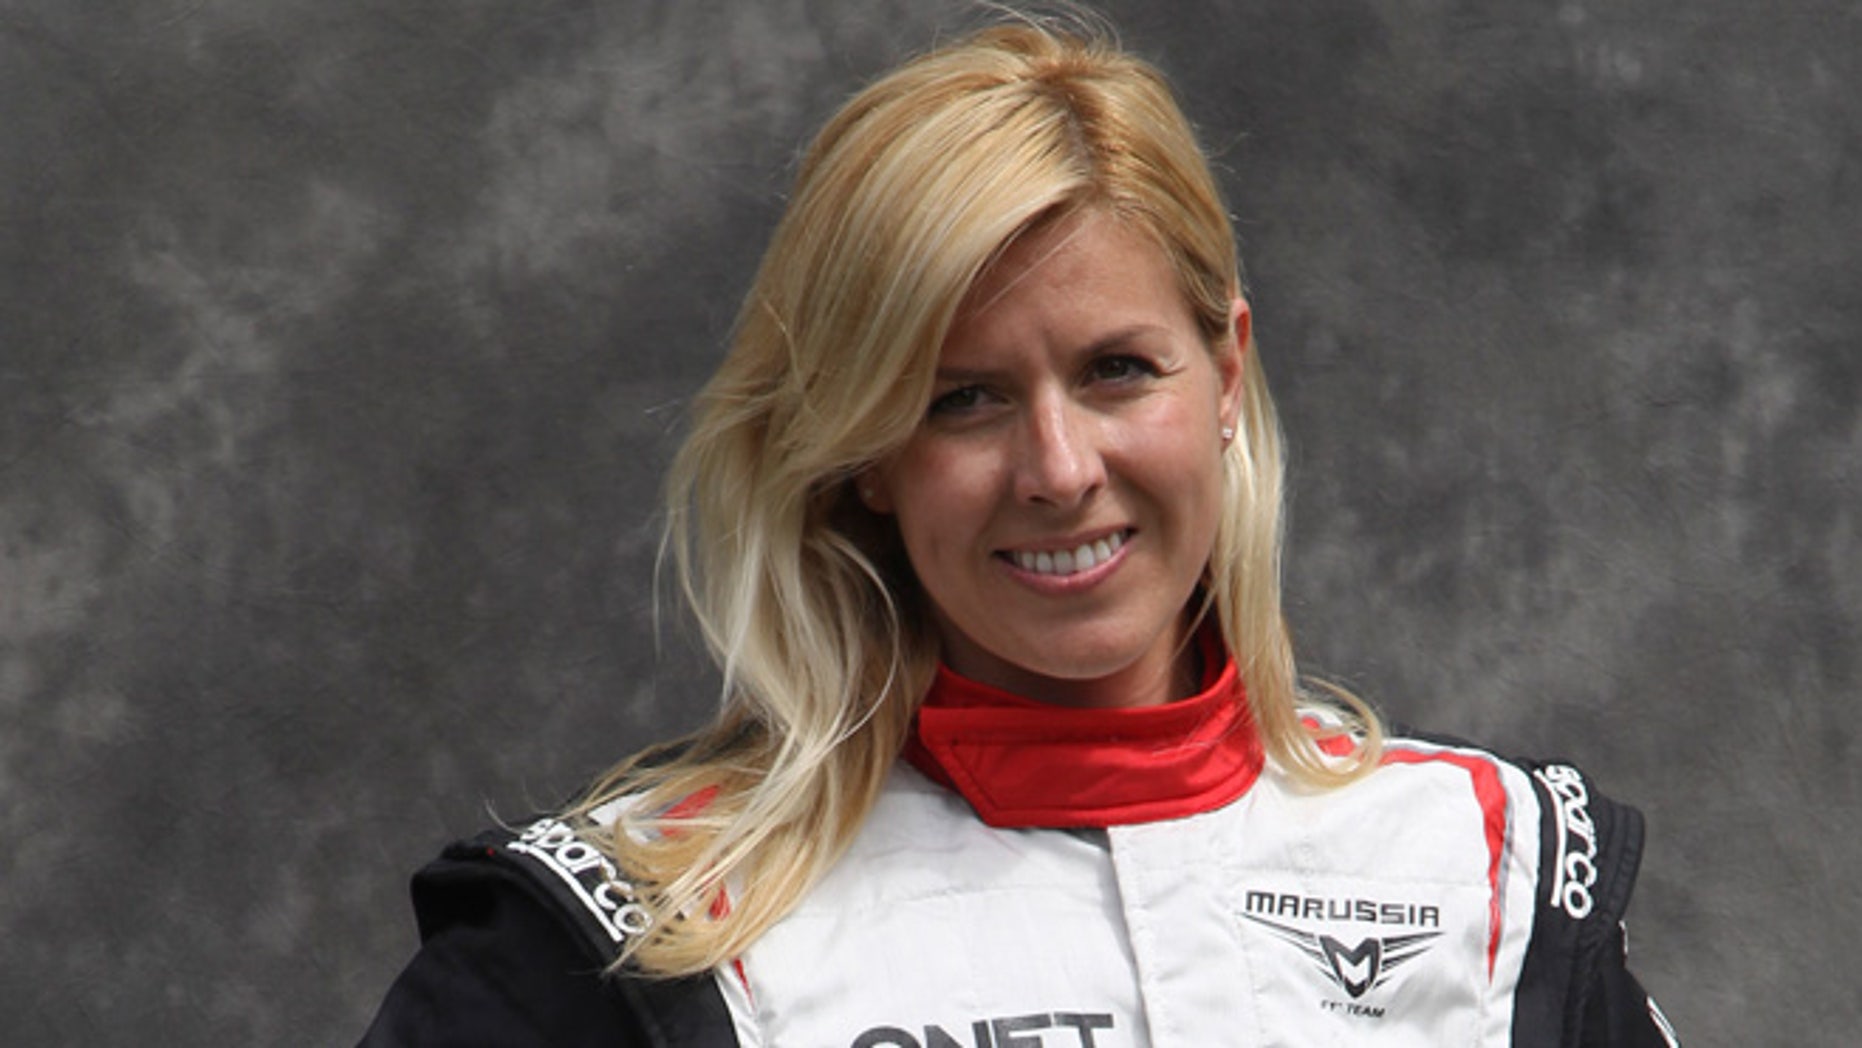 Female F1 driver seriously injured in crash Fox News